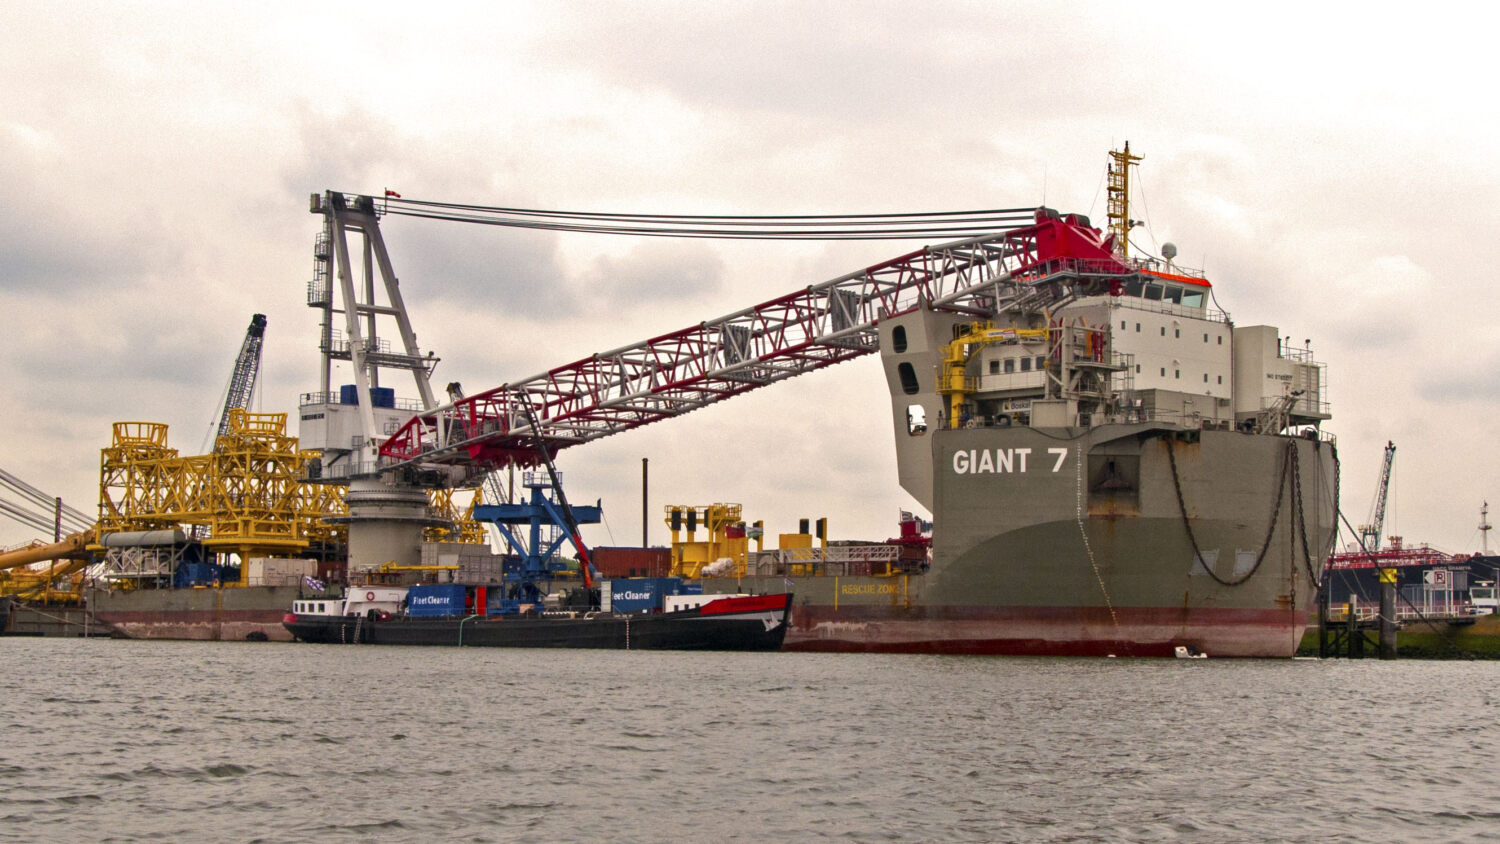 hull cleaning in port